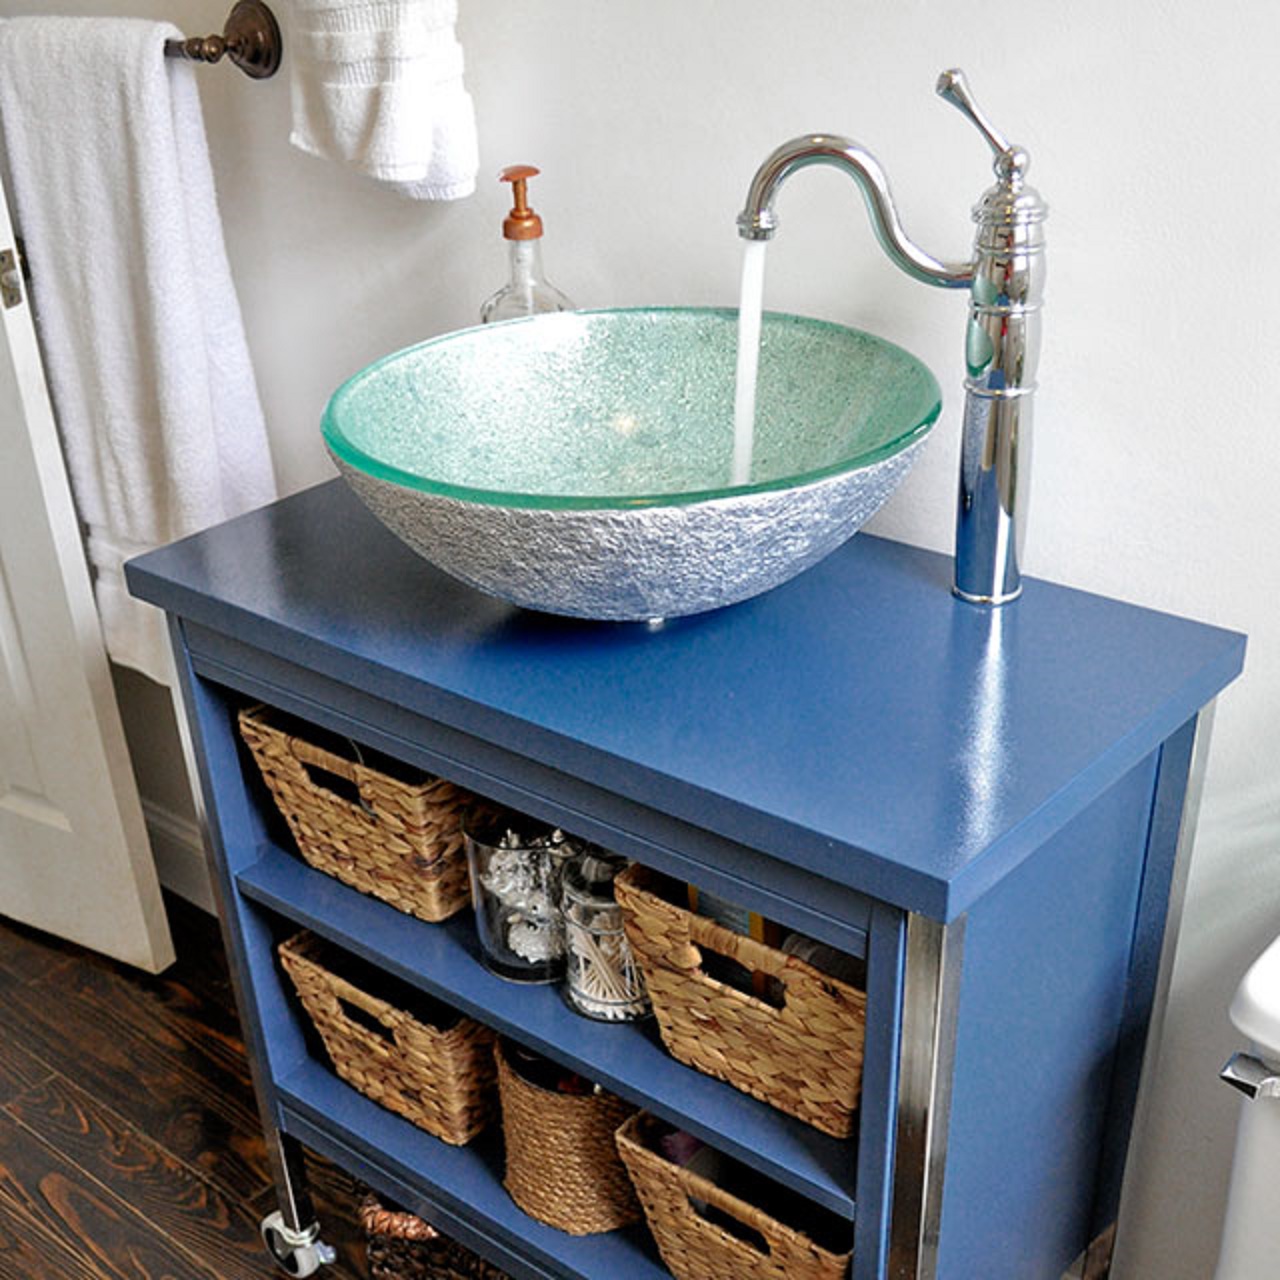 Budget Home Improvement: Turning a Metal Cabinet into a Vanity, Pt. 1